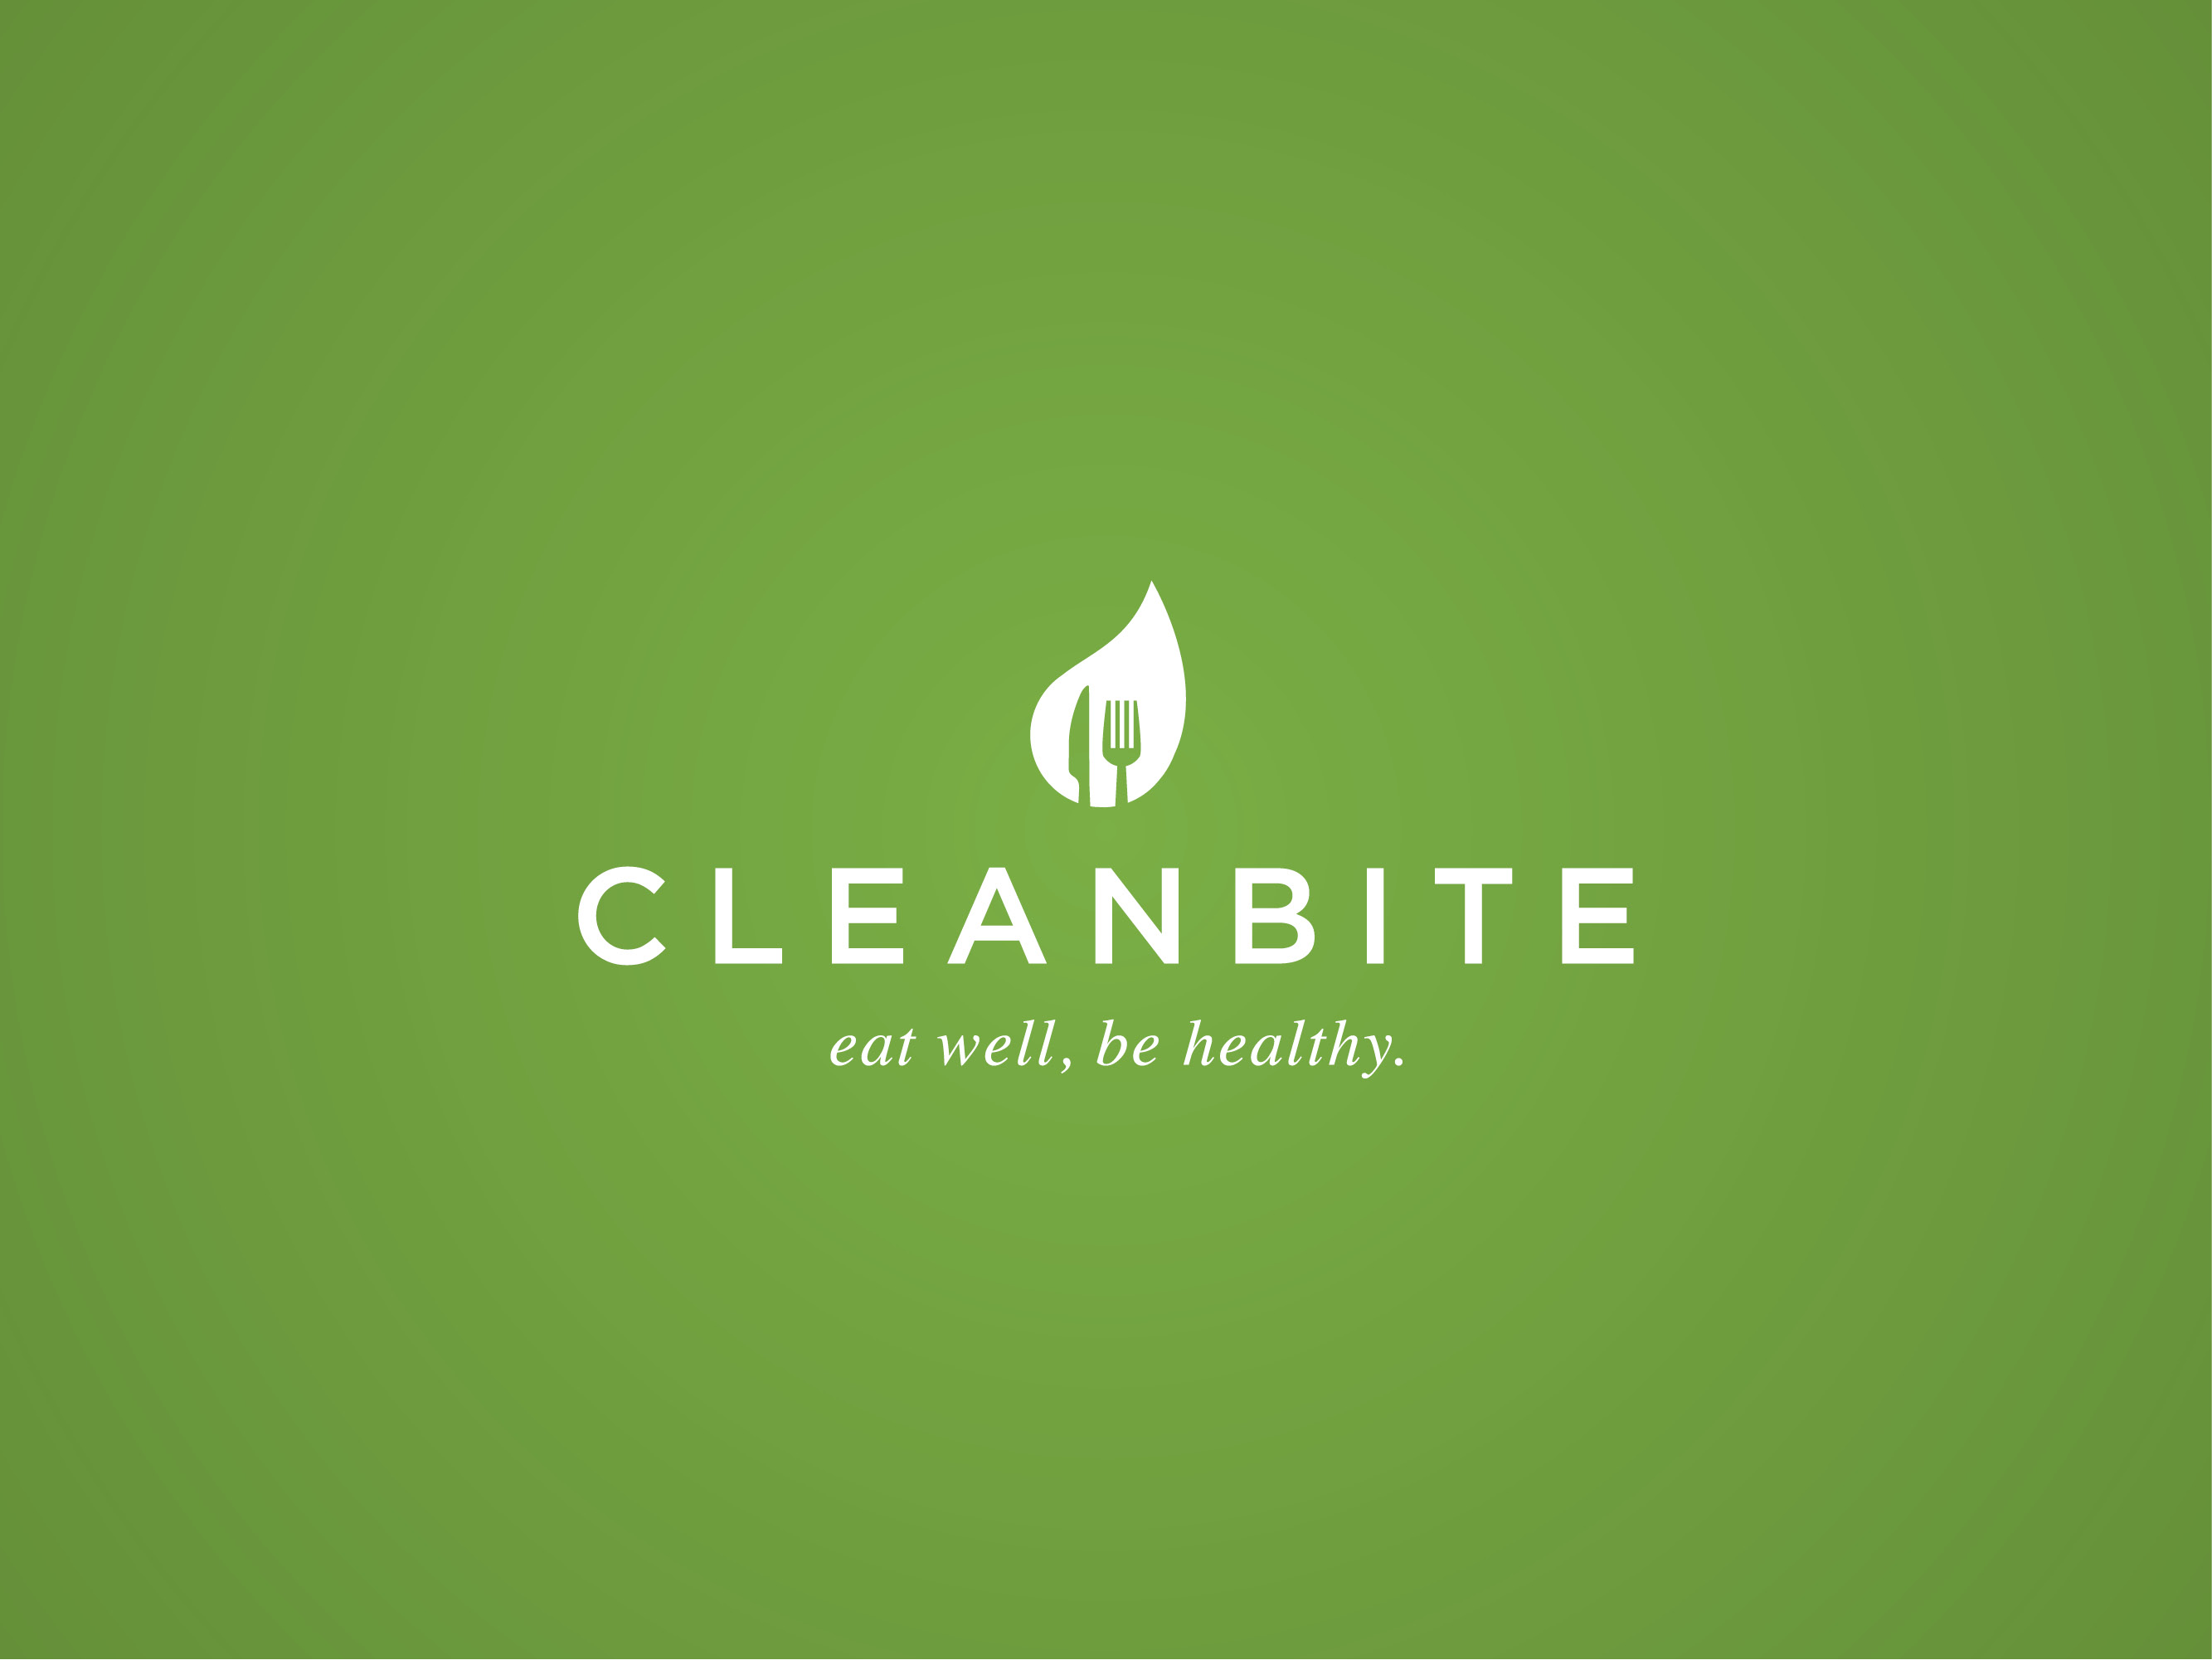 Cleanbite healthy eating catering service branding